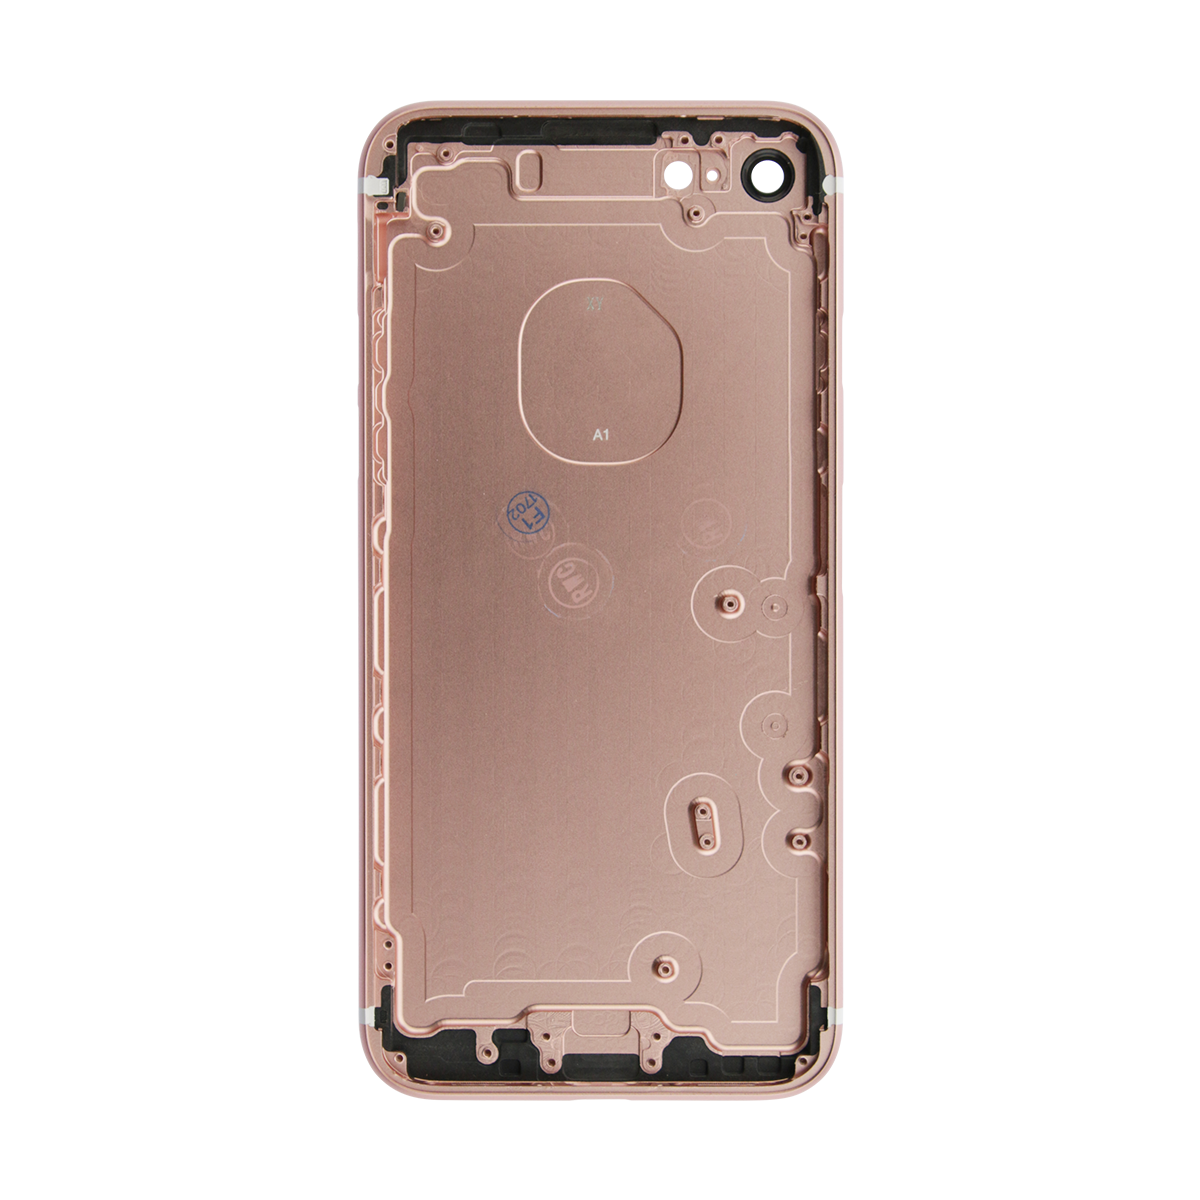 For iPhone 7 Back Housing Replacement (No Small Parts) (All Color)